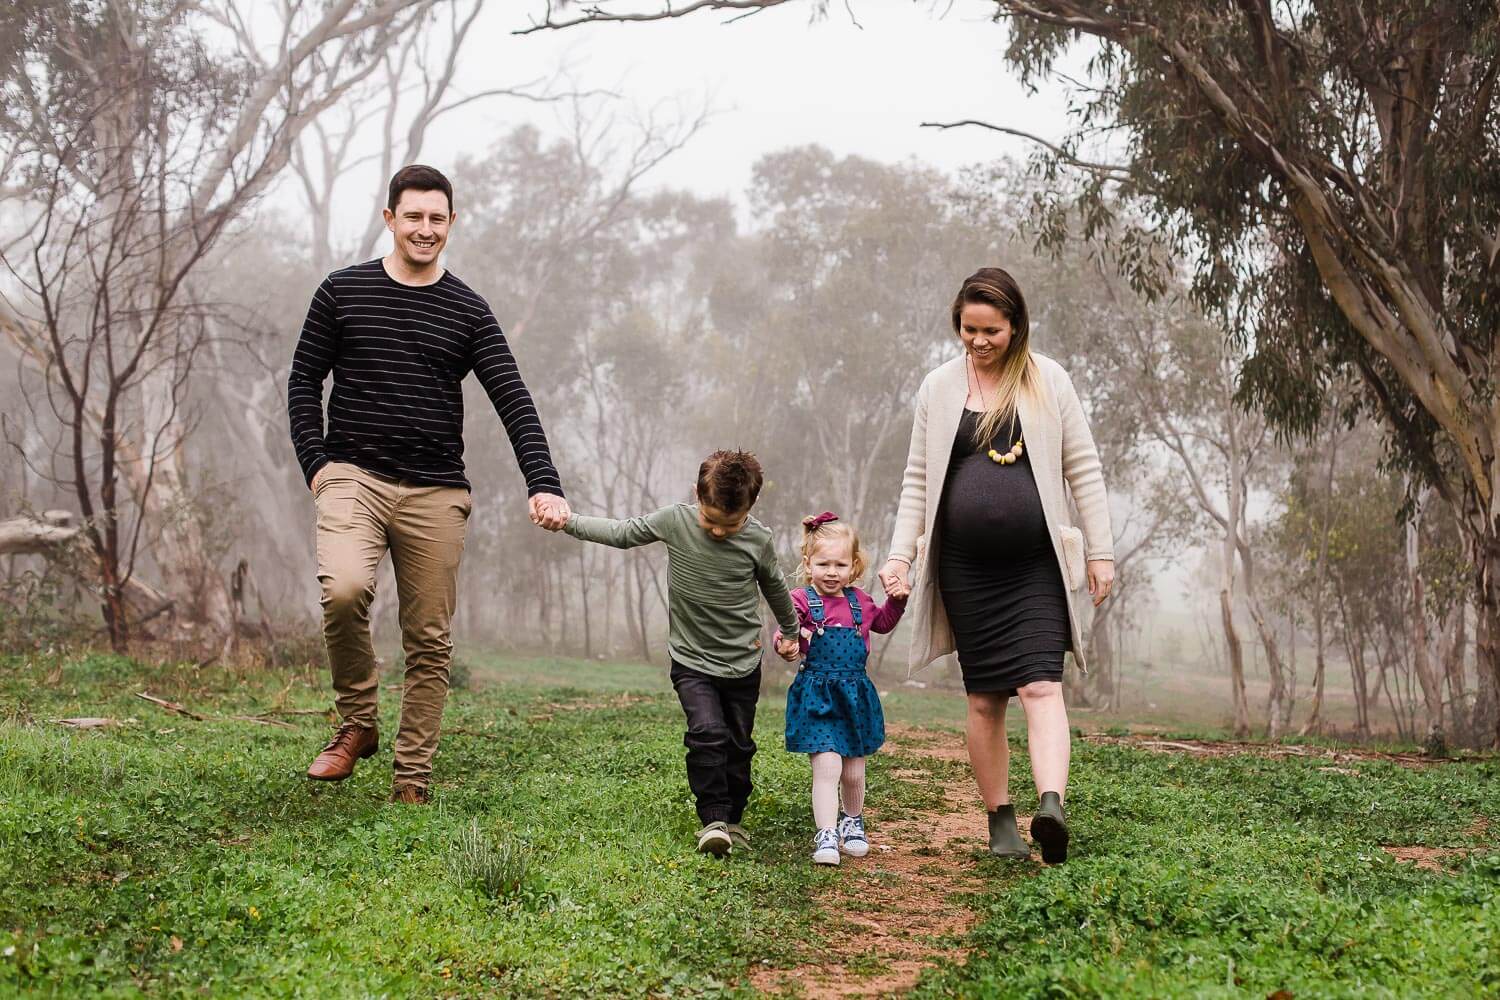 Liss Hillam Photography wagga wagga weddng and portrait photographer 3 -6